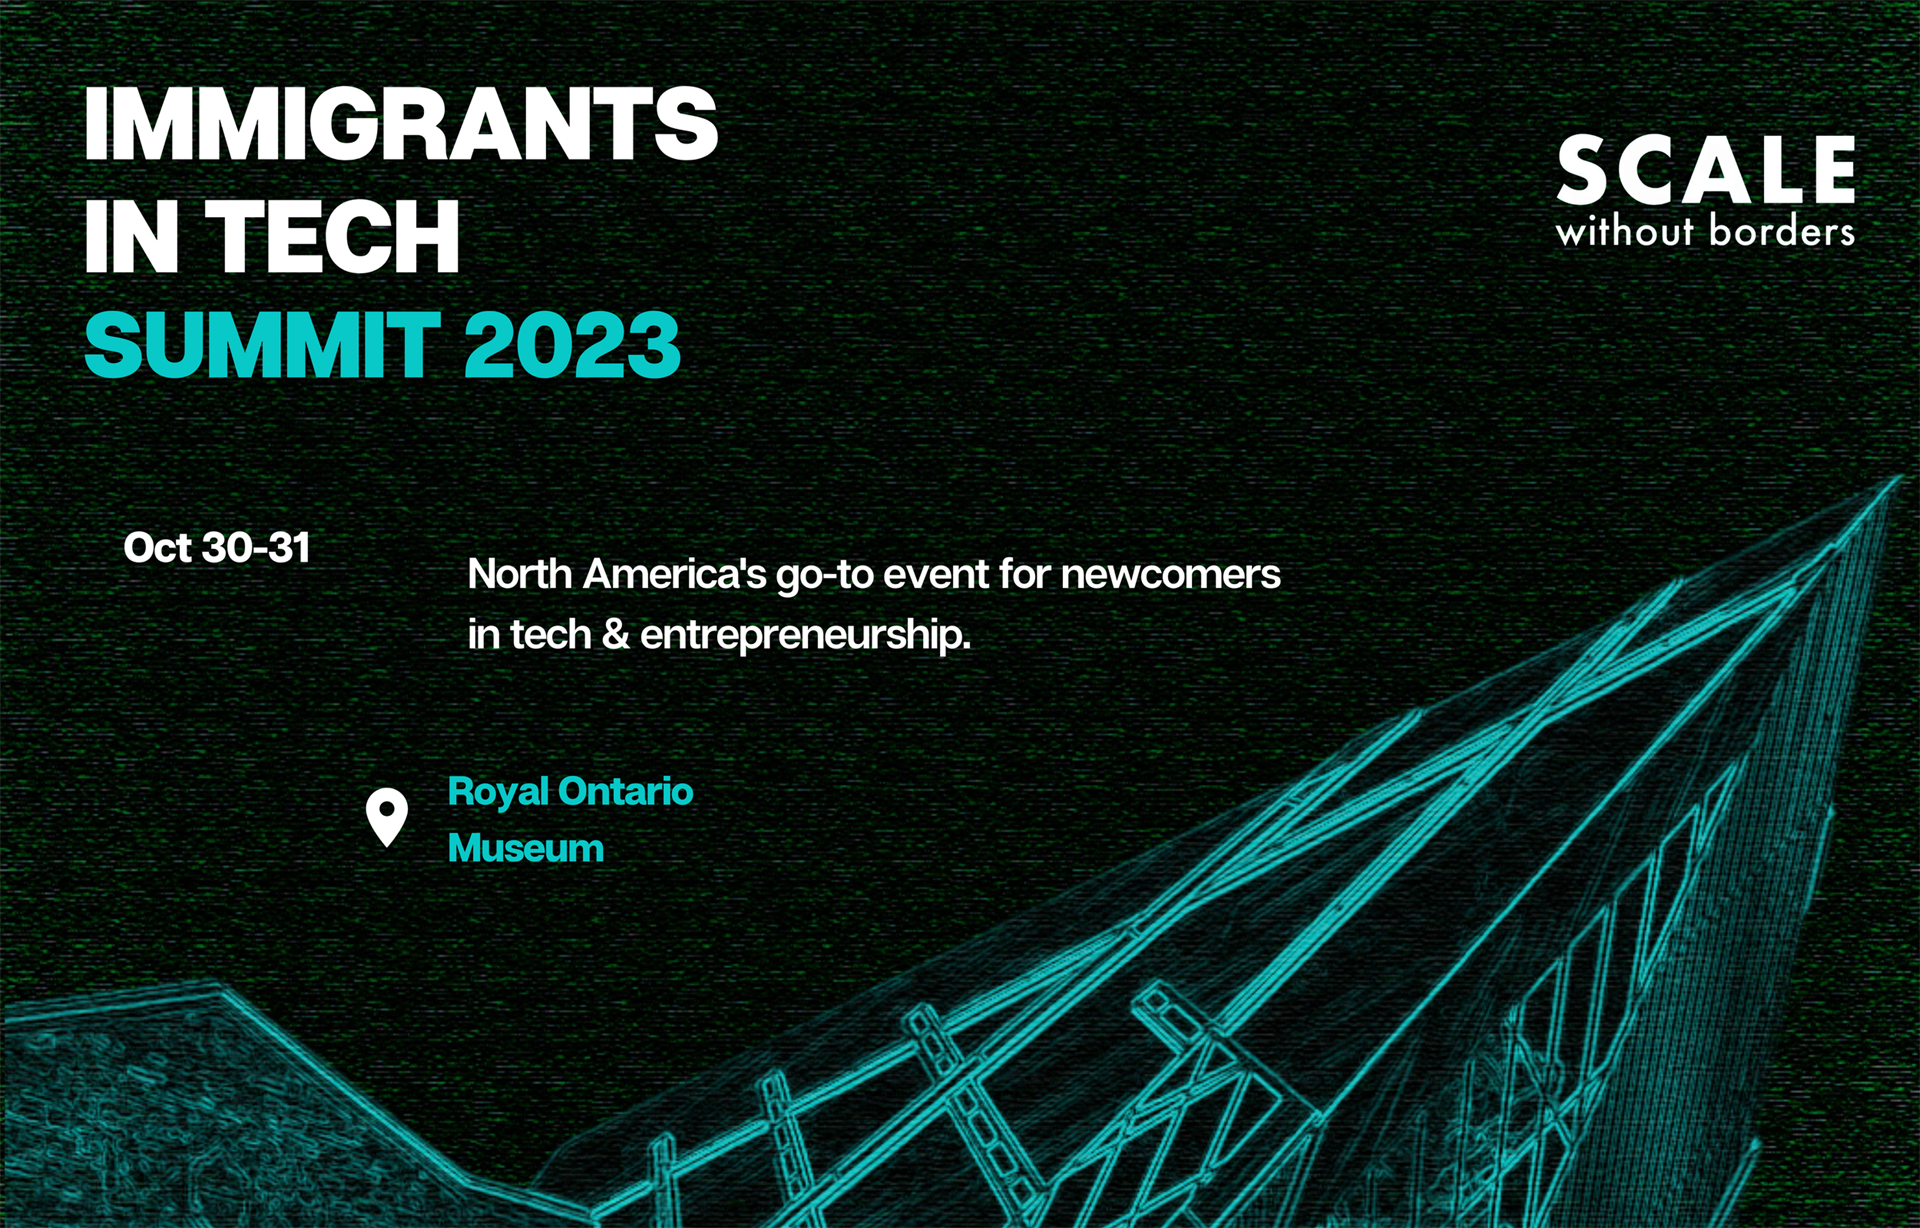 Scale Without Borders Immigrants in Tech Summit 2023